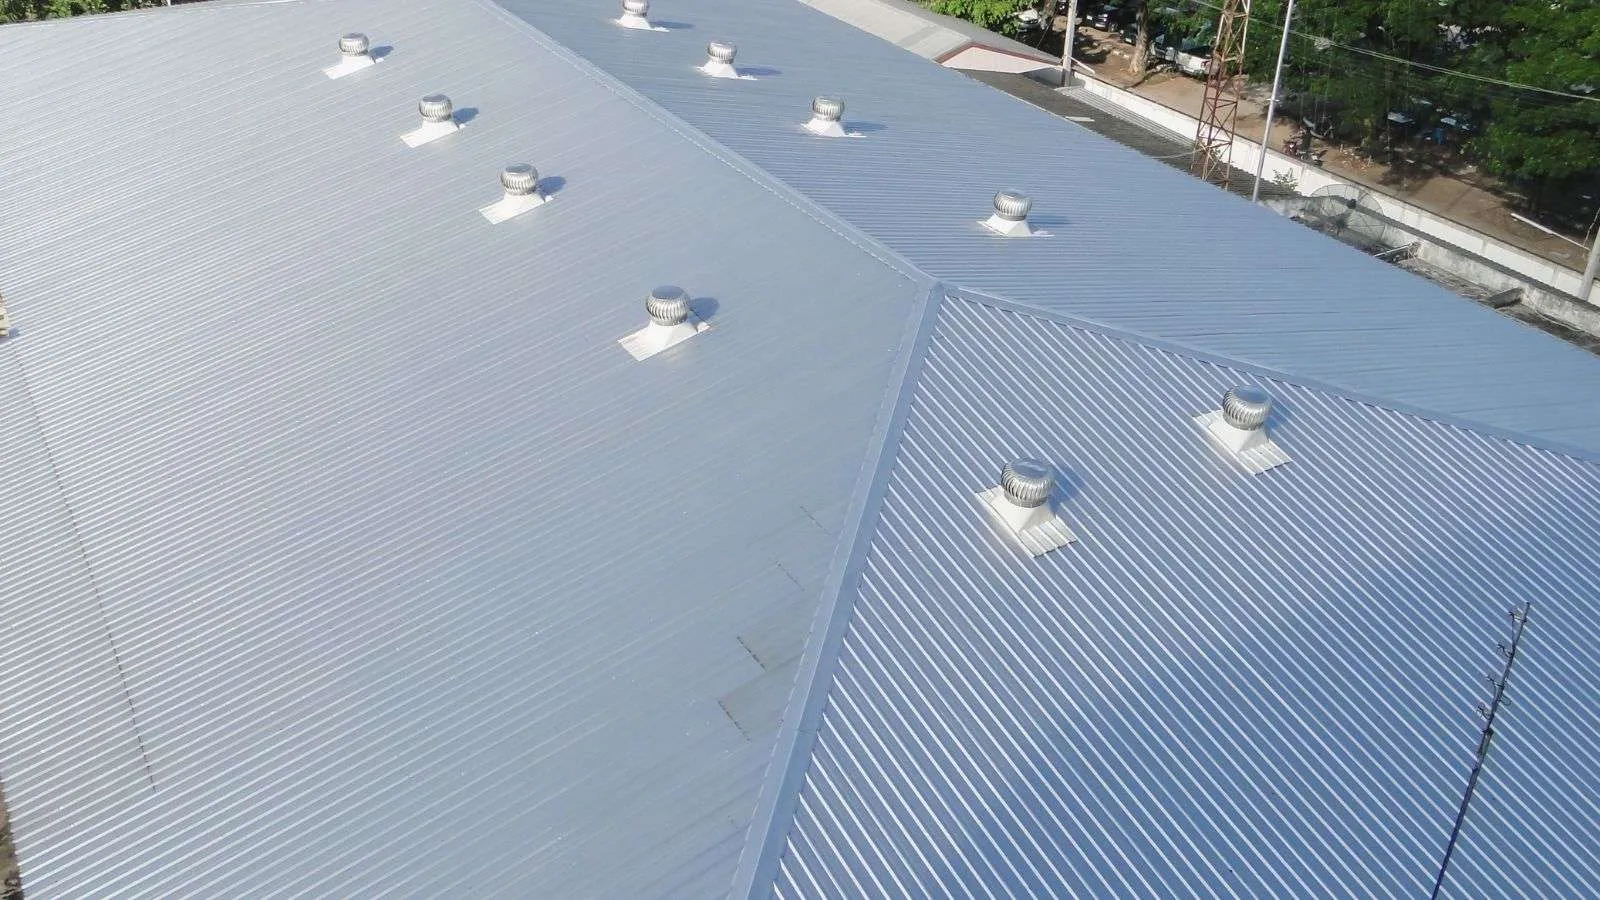 commercial metal roof maintenance - bighomeprojects.com